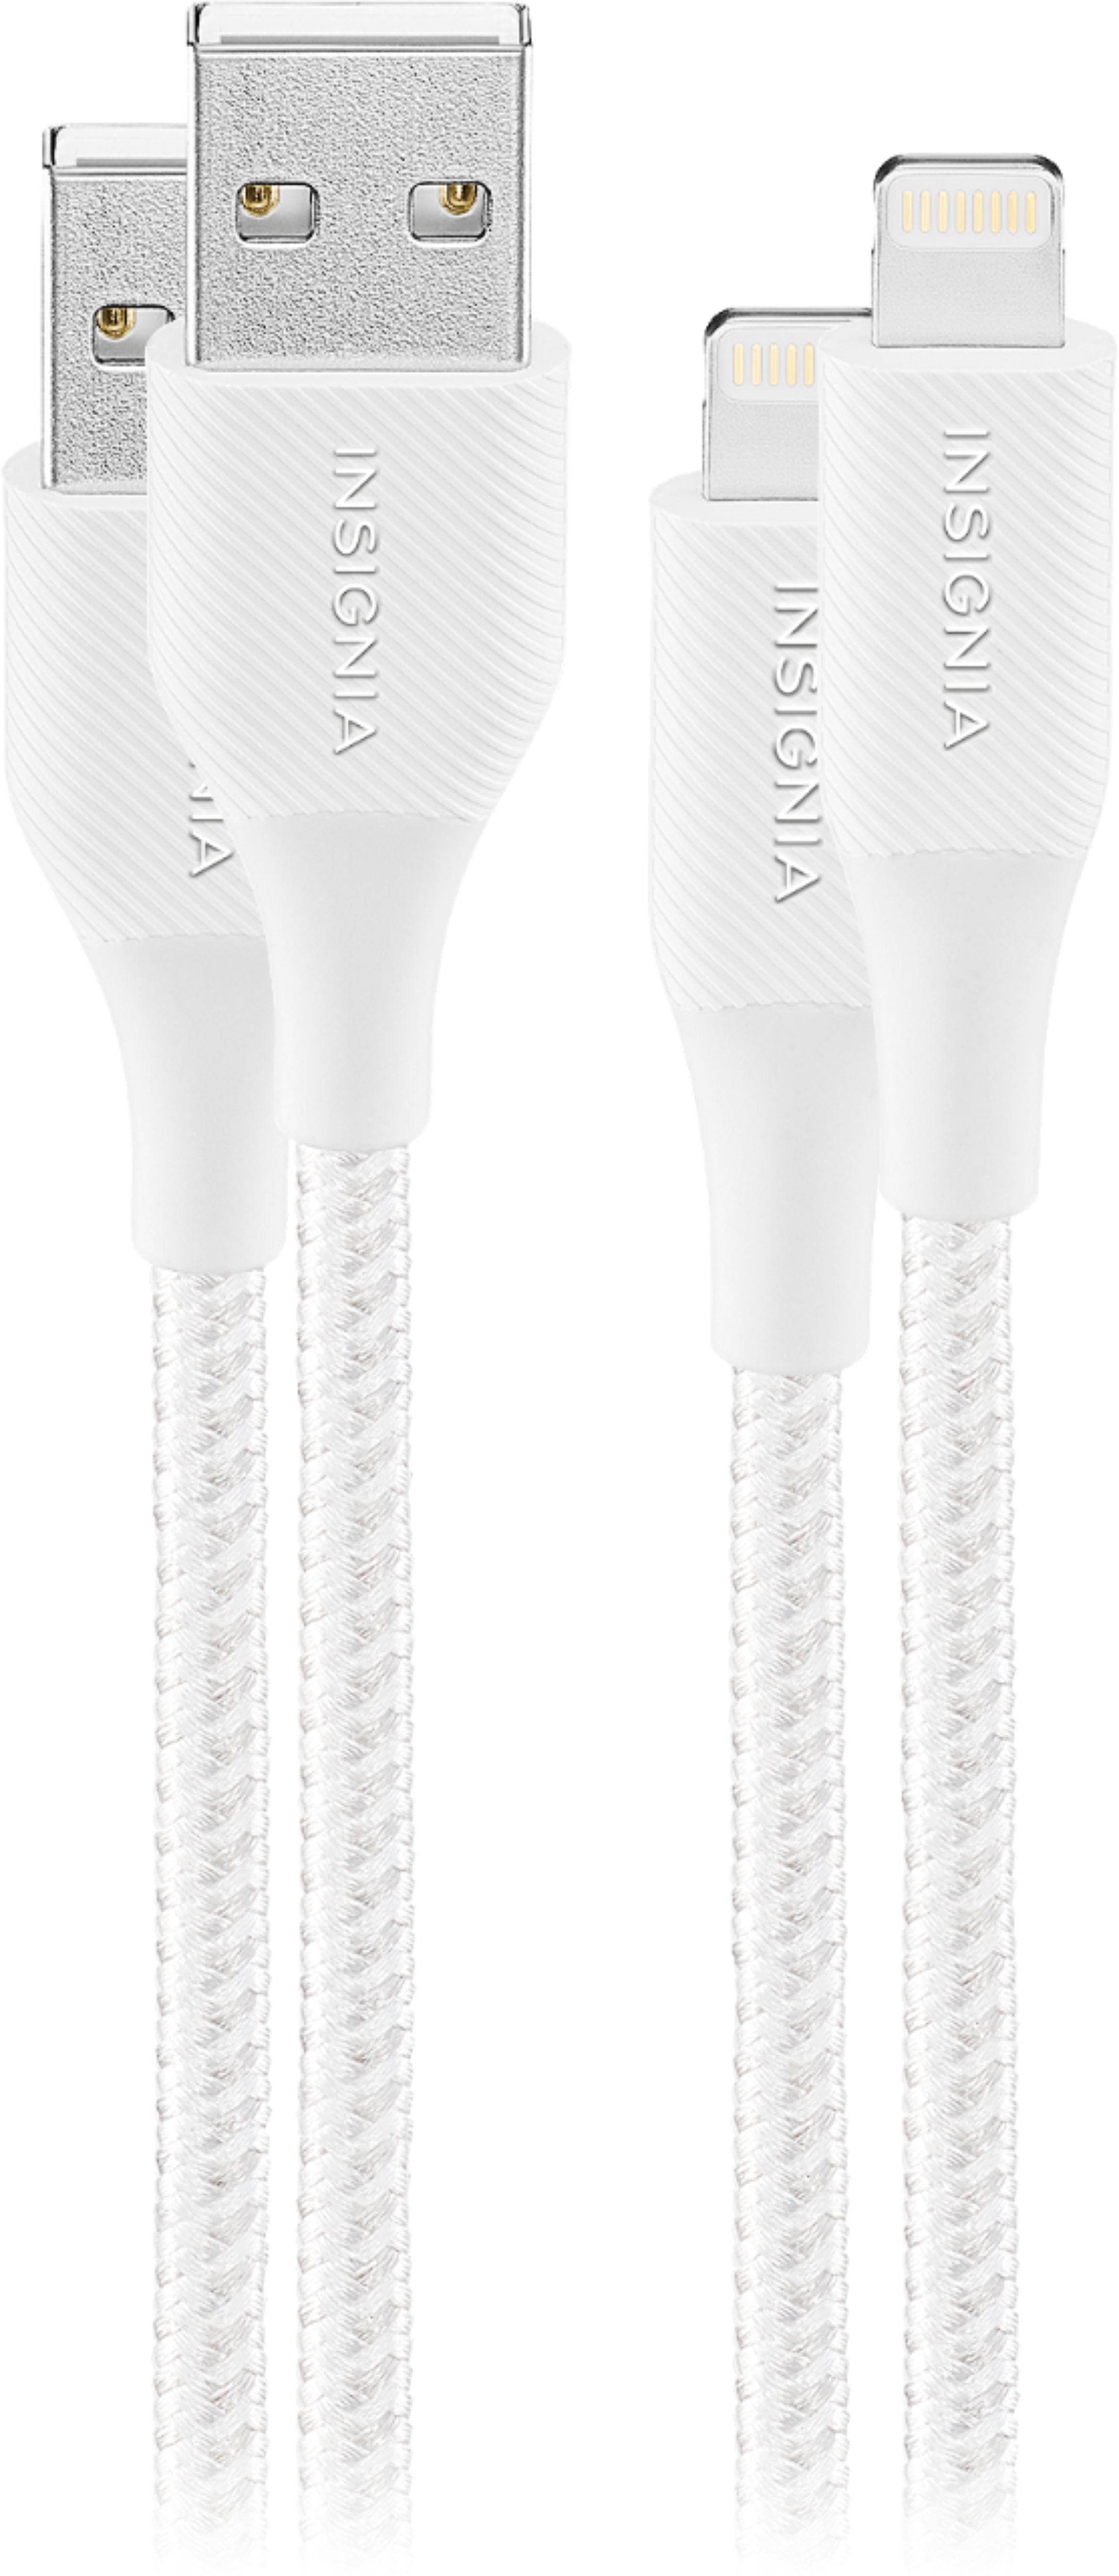 Angle View: Insignia™ - 4' Lightning to USB Charge-and-Sync Cable (2 Pack) - Moon Gray